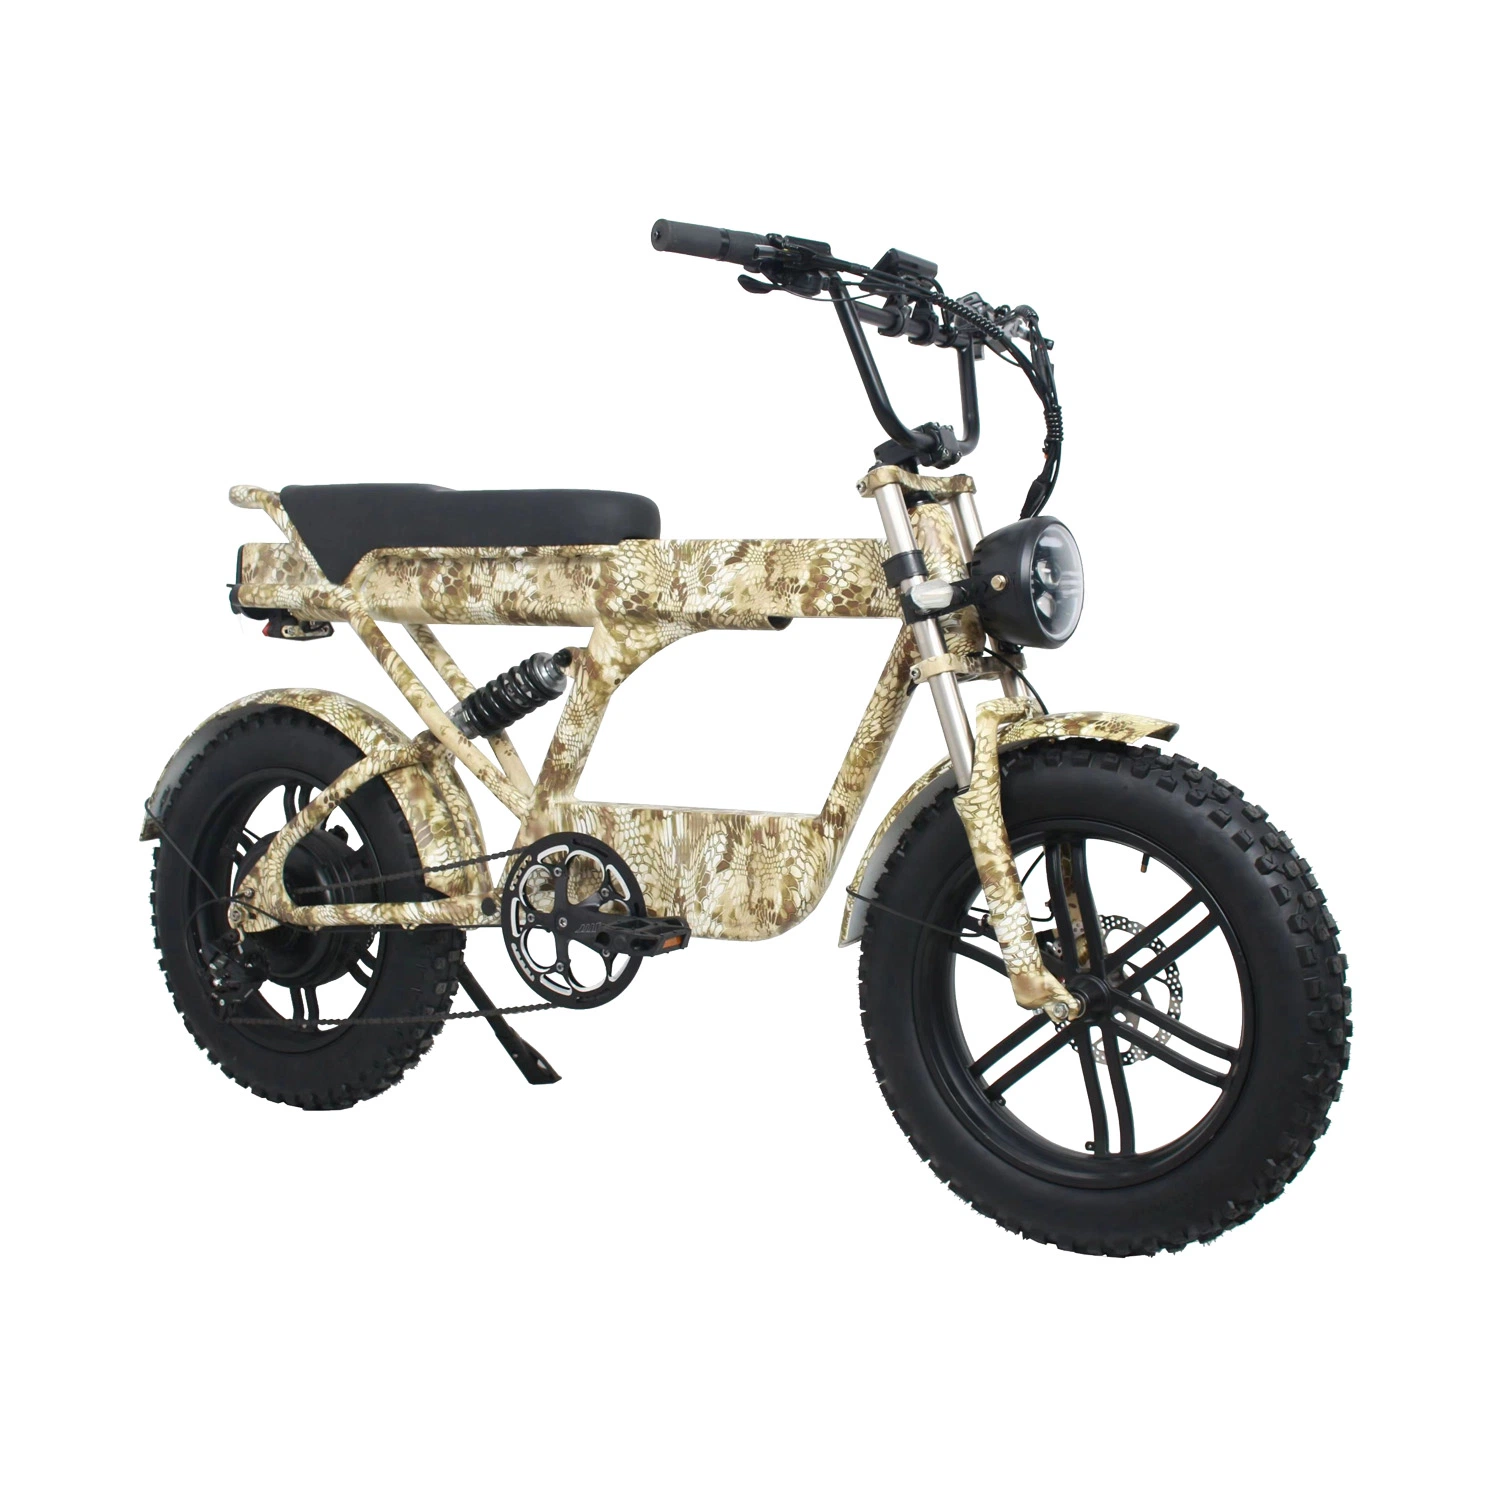 Suitable for Snowy Days 1500W 48V 32ah Electric Bike Best Fat Tire Ebike Big Tires Snow Electric Bike